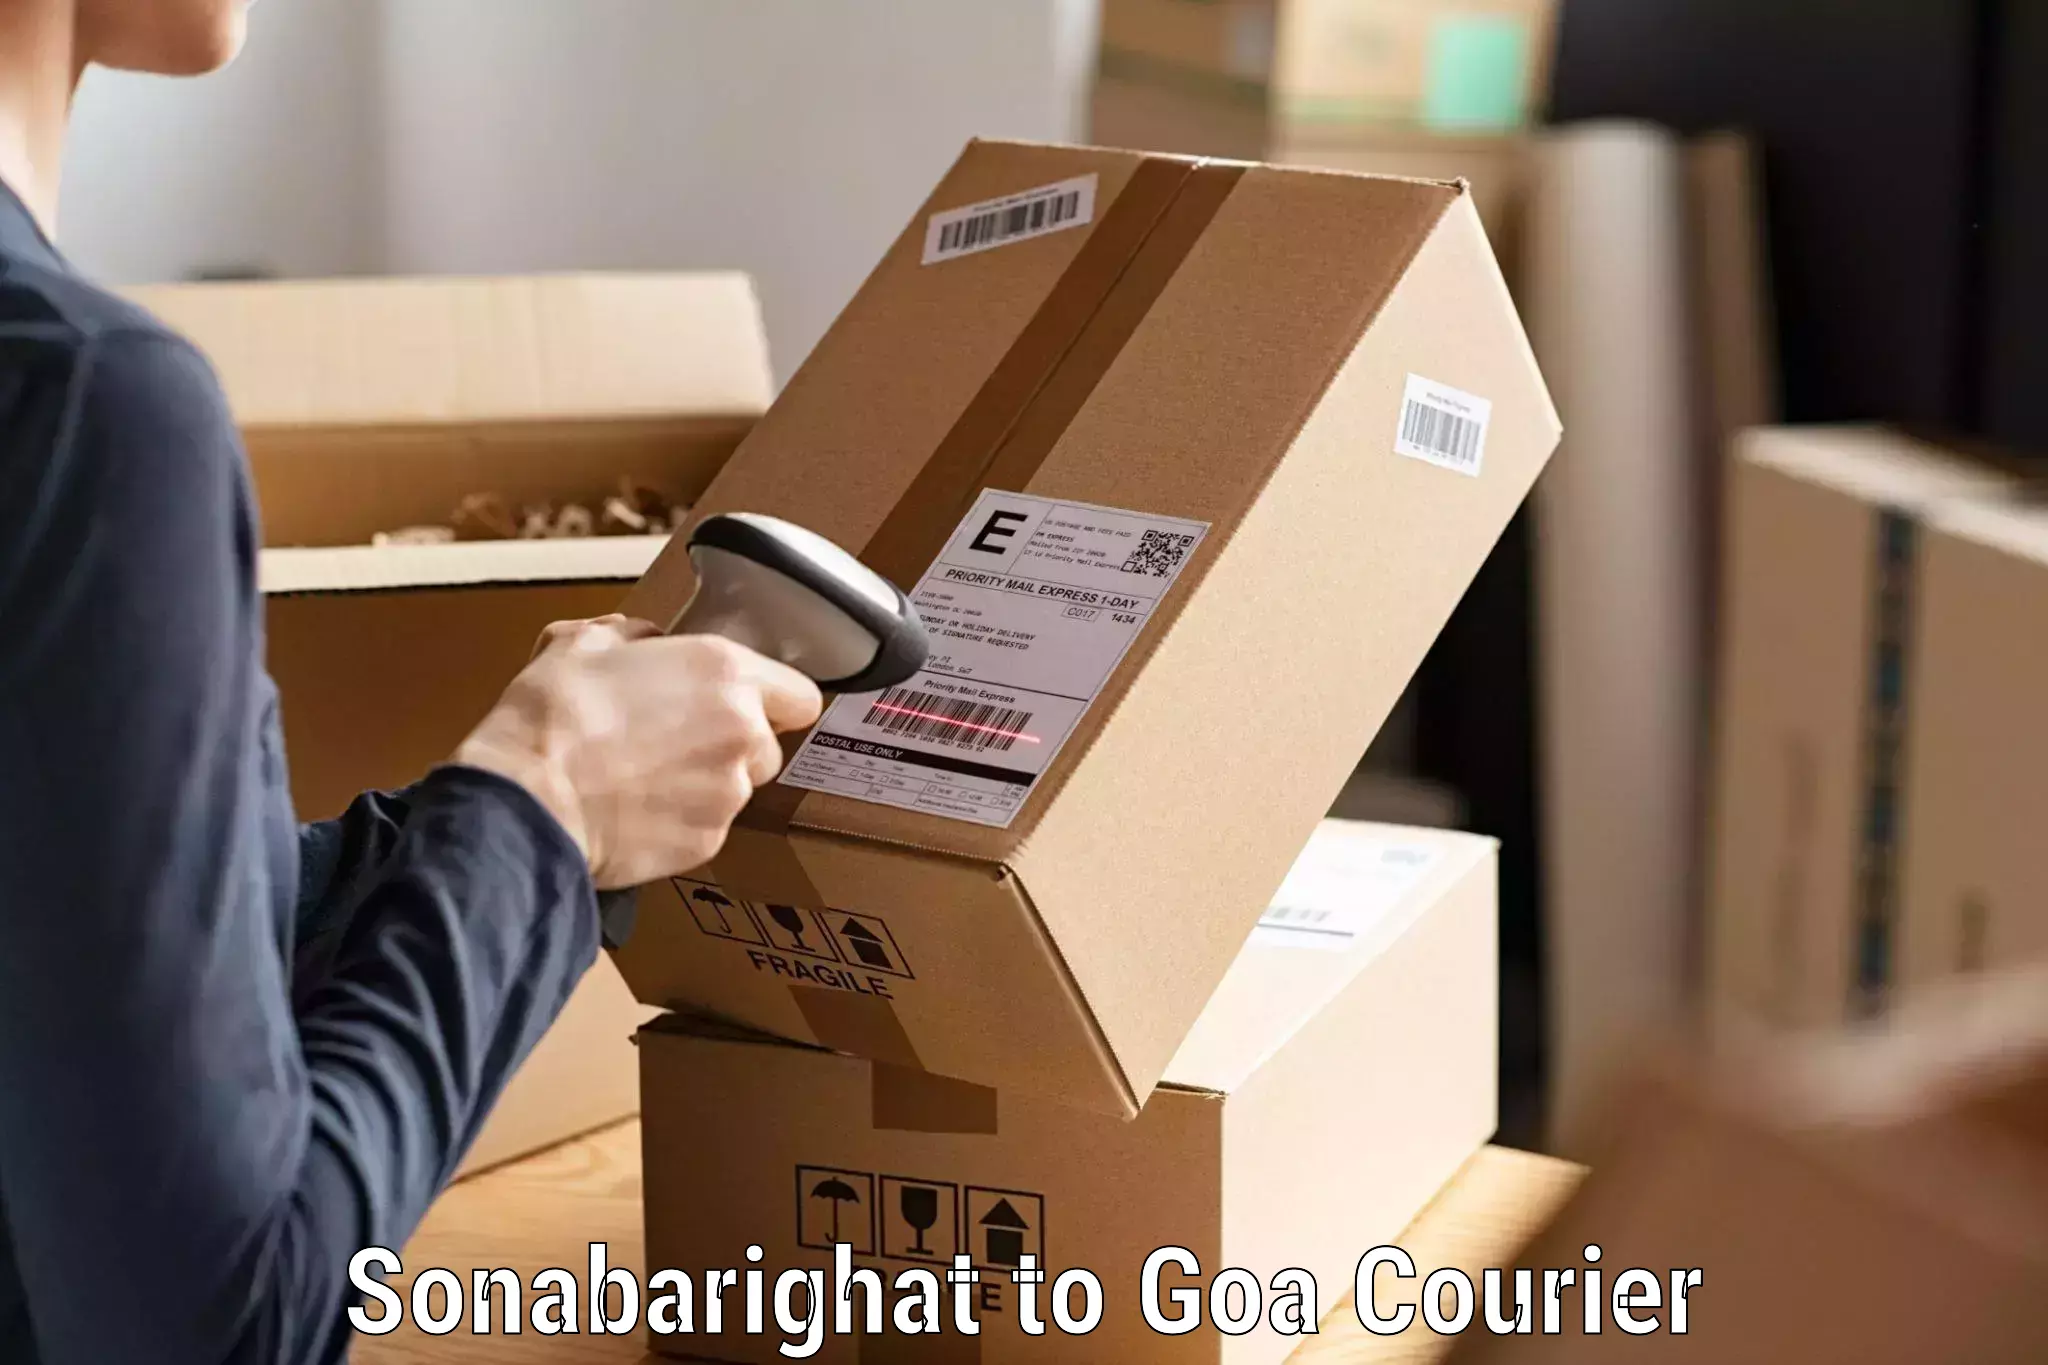 Express delivery capabilities Sonabarighat to Bardez